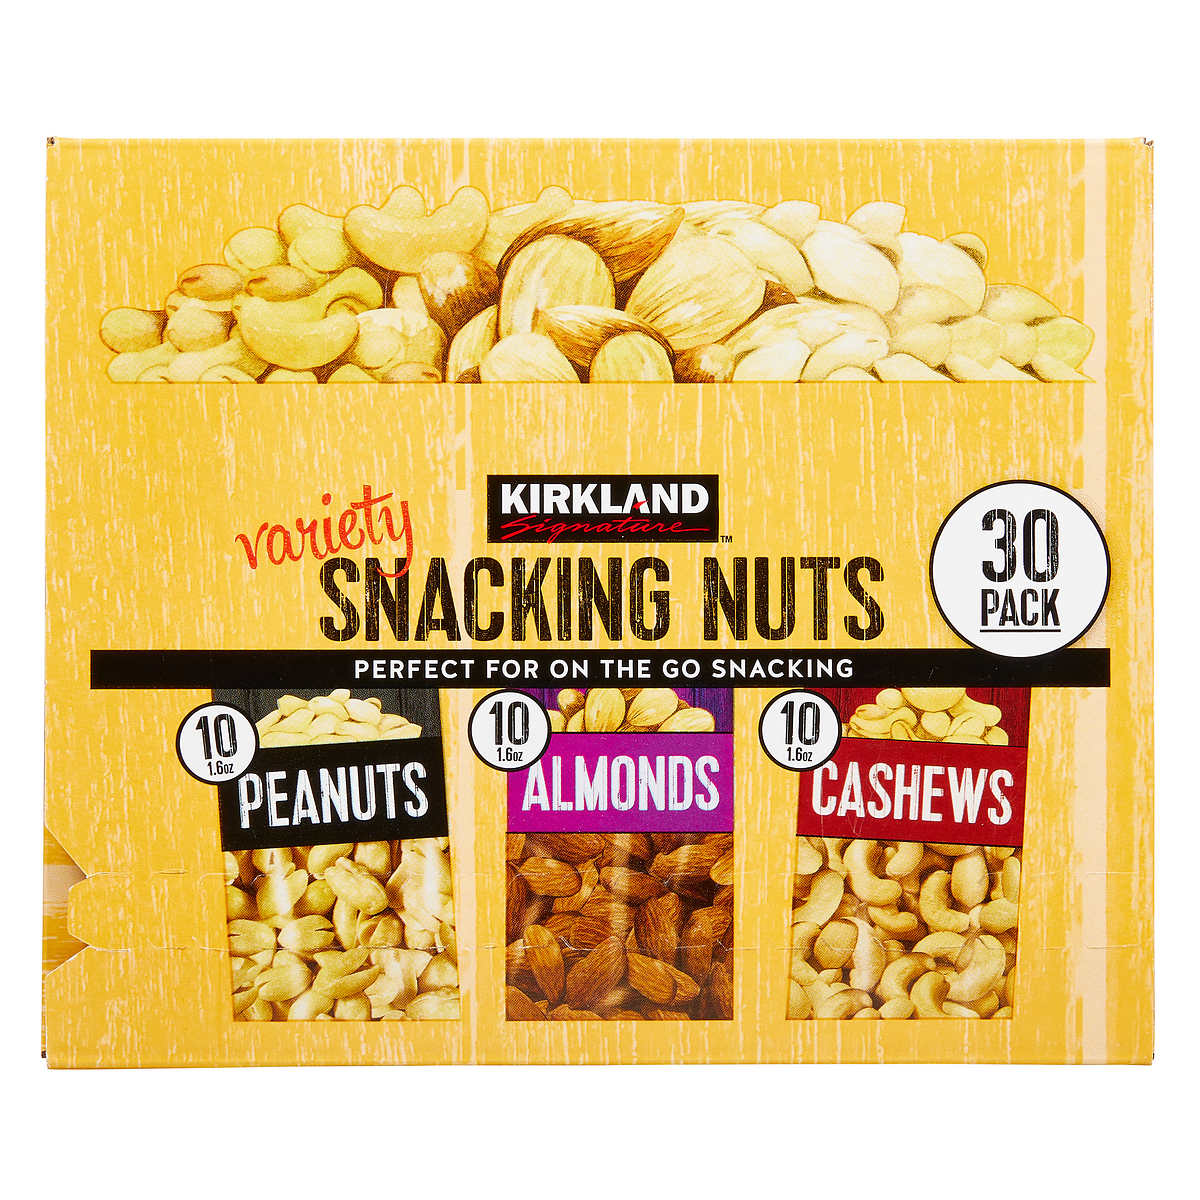 Best Kirkland Signature Snacking Nuts Variety Pack 1.6 oz 30-count